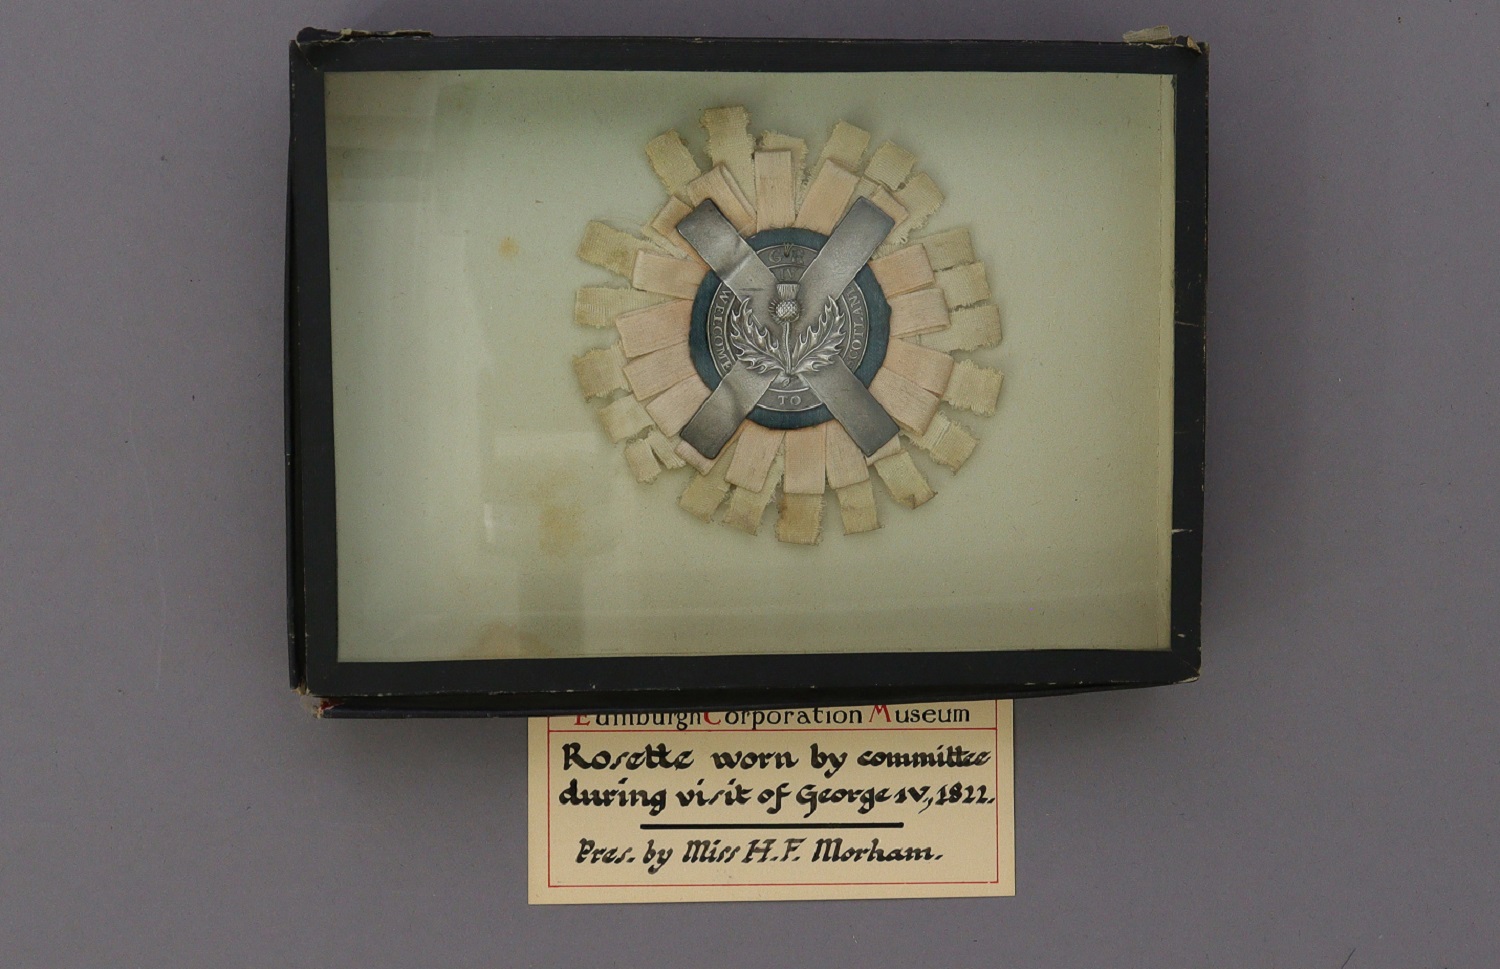 Rosette with its original museum label and display box